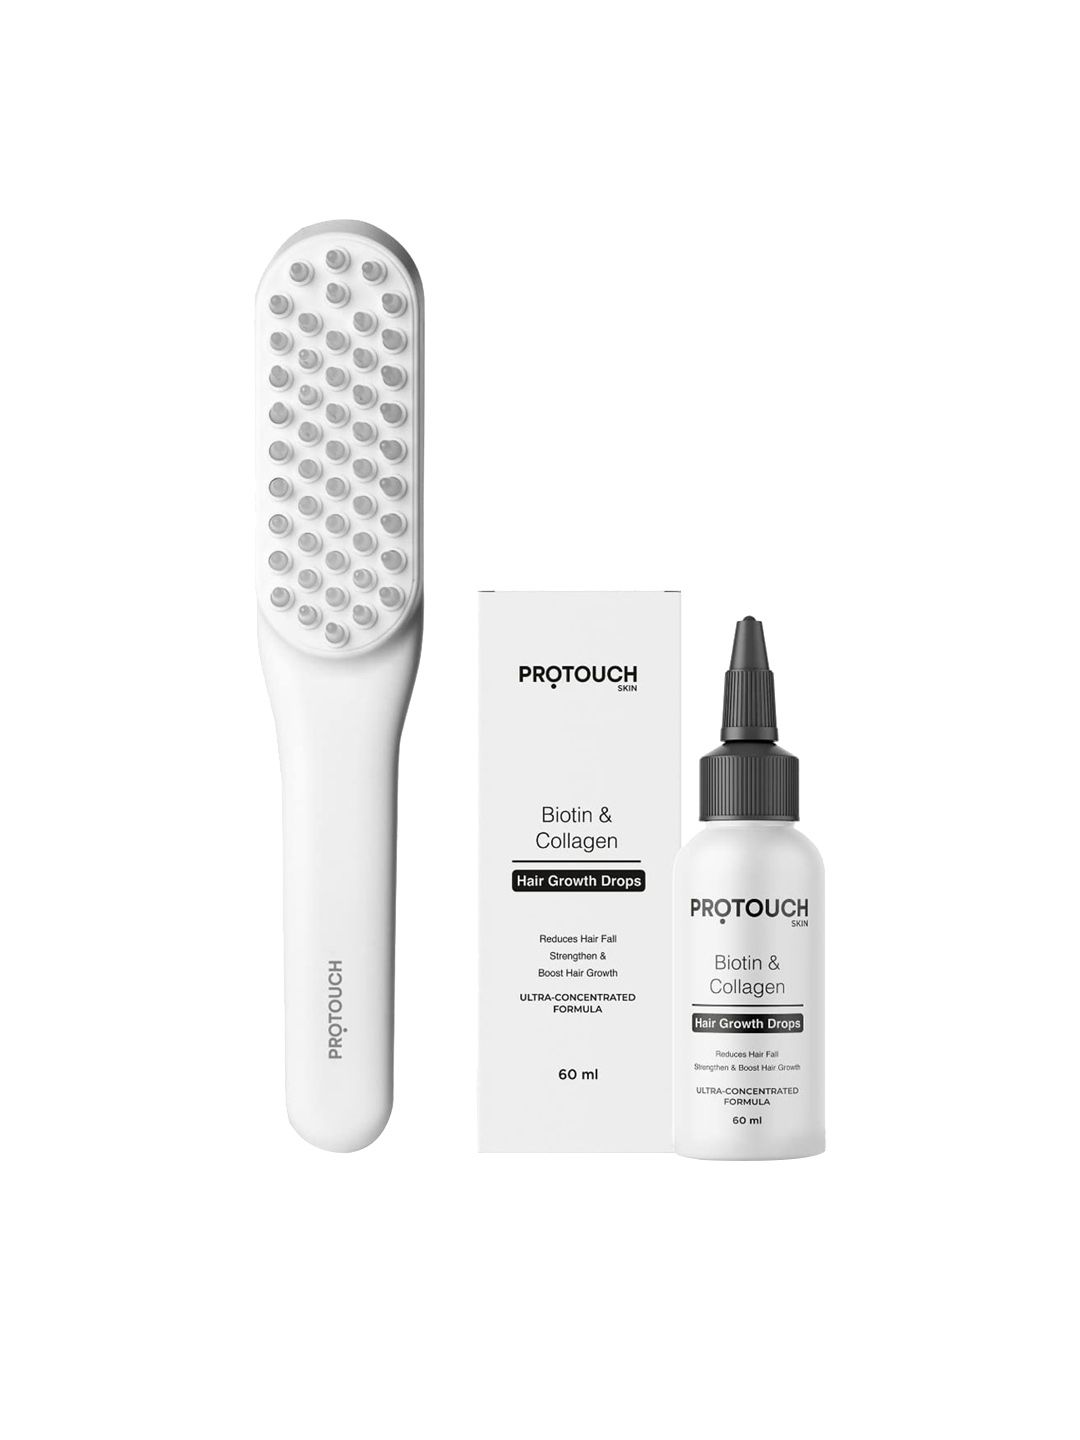 PROTOUCH LED Hair Growth Therapy Hair Care Kit Price in India